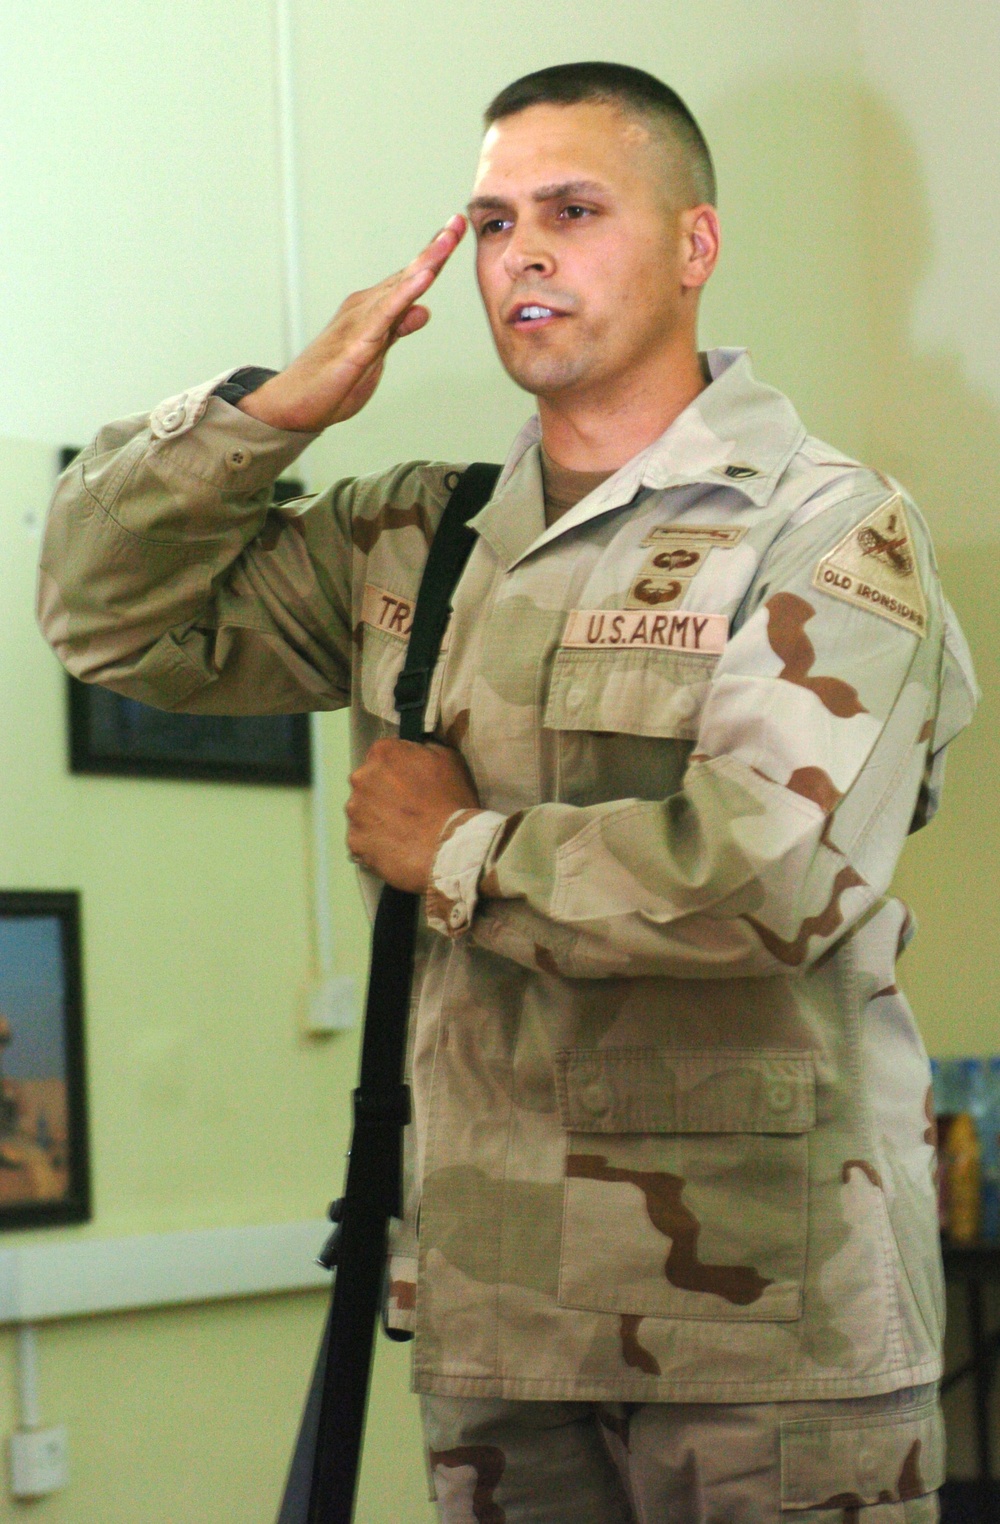 Staff Sgt. George Traver salutes during a board